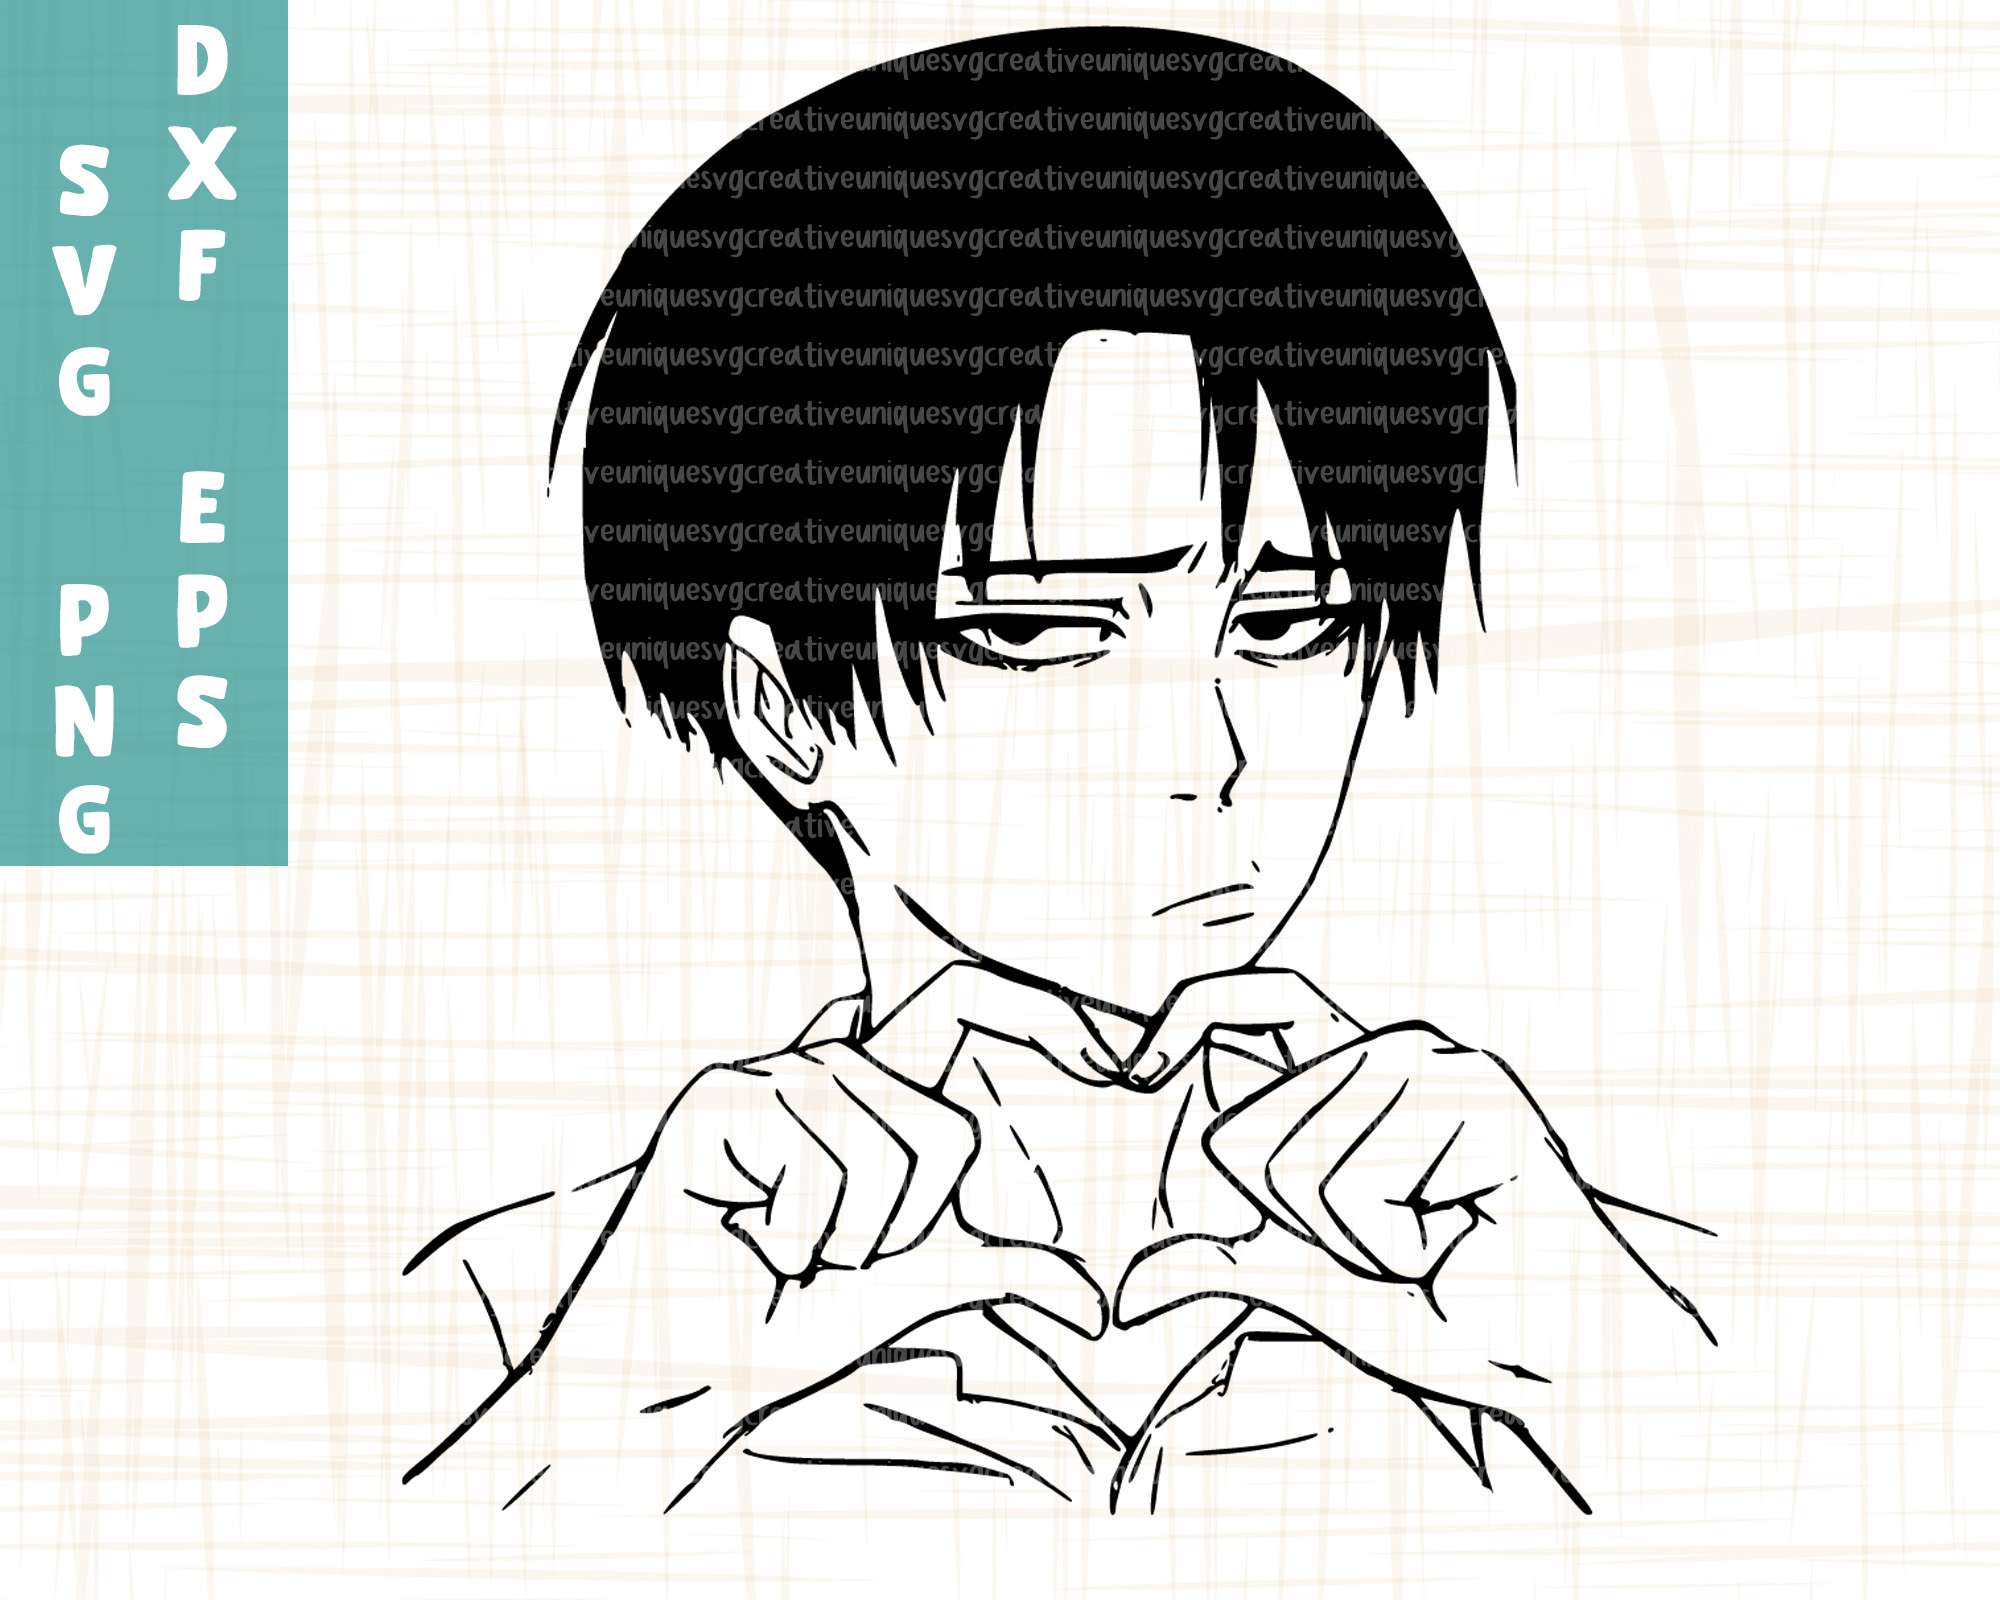 Svg Cricut File Levi includes Eps and Pdf files Anime Character Studio Cameo File, Attack on Titan for vynil cut.